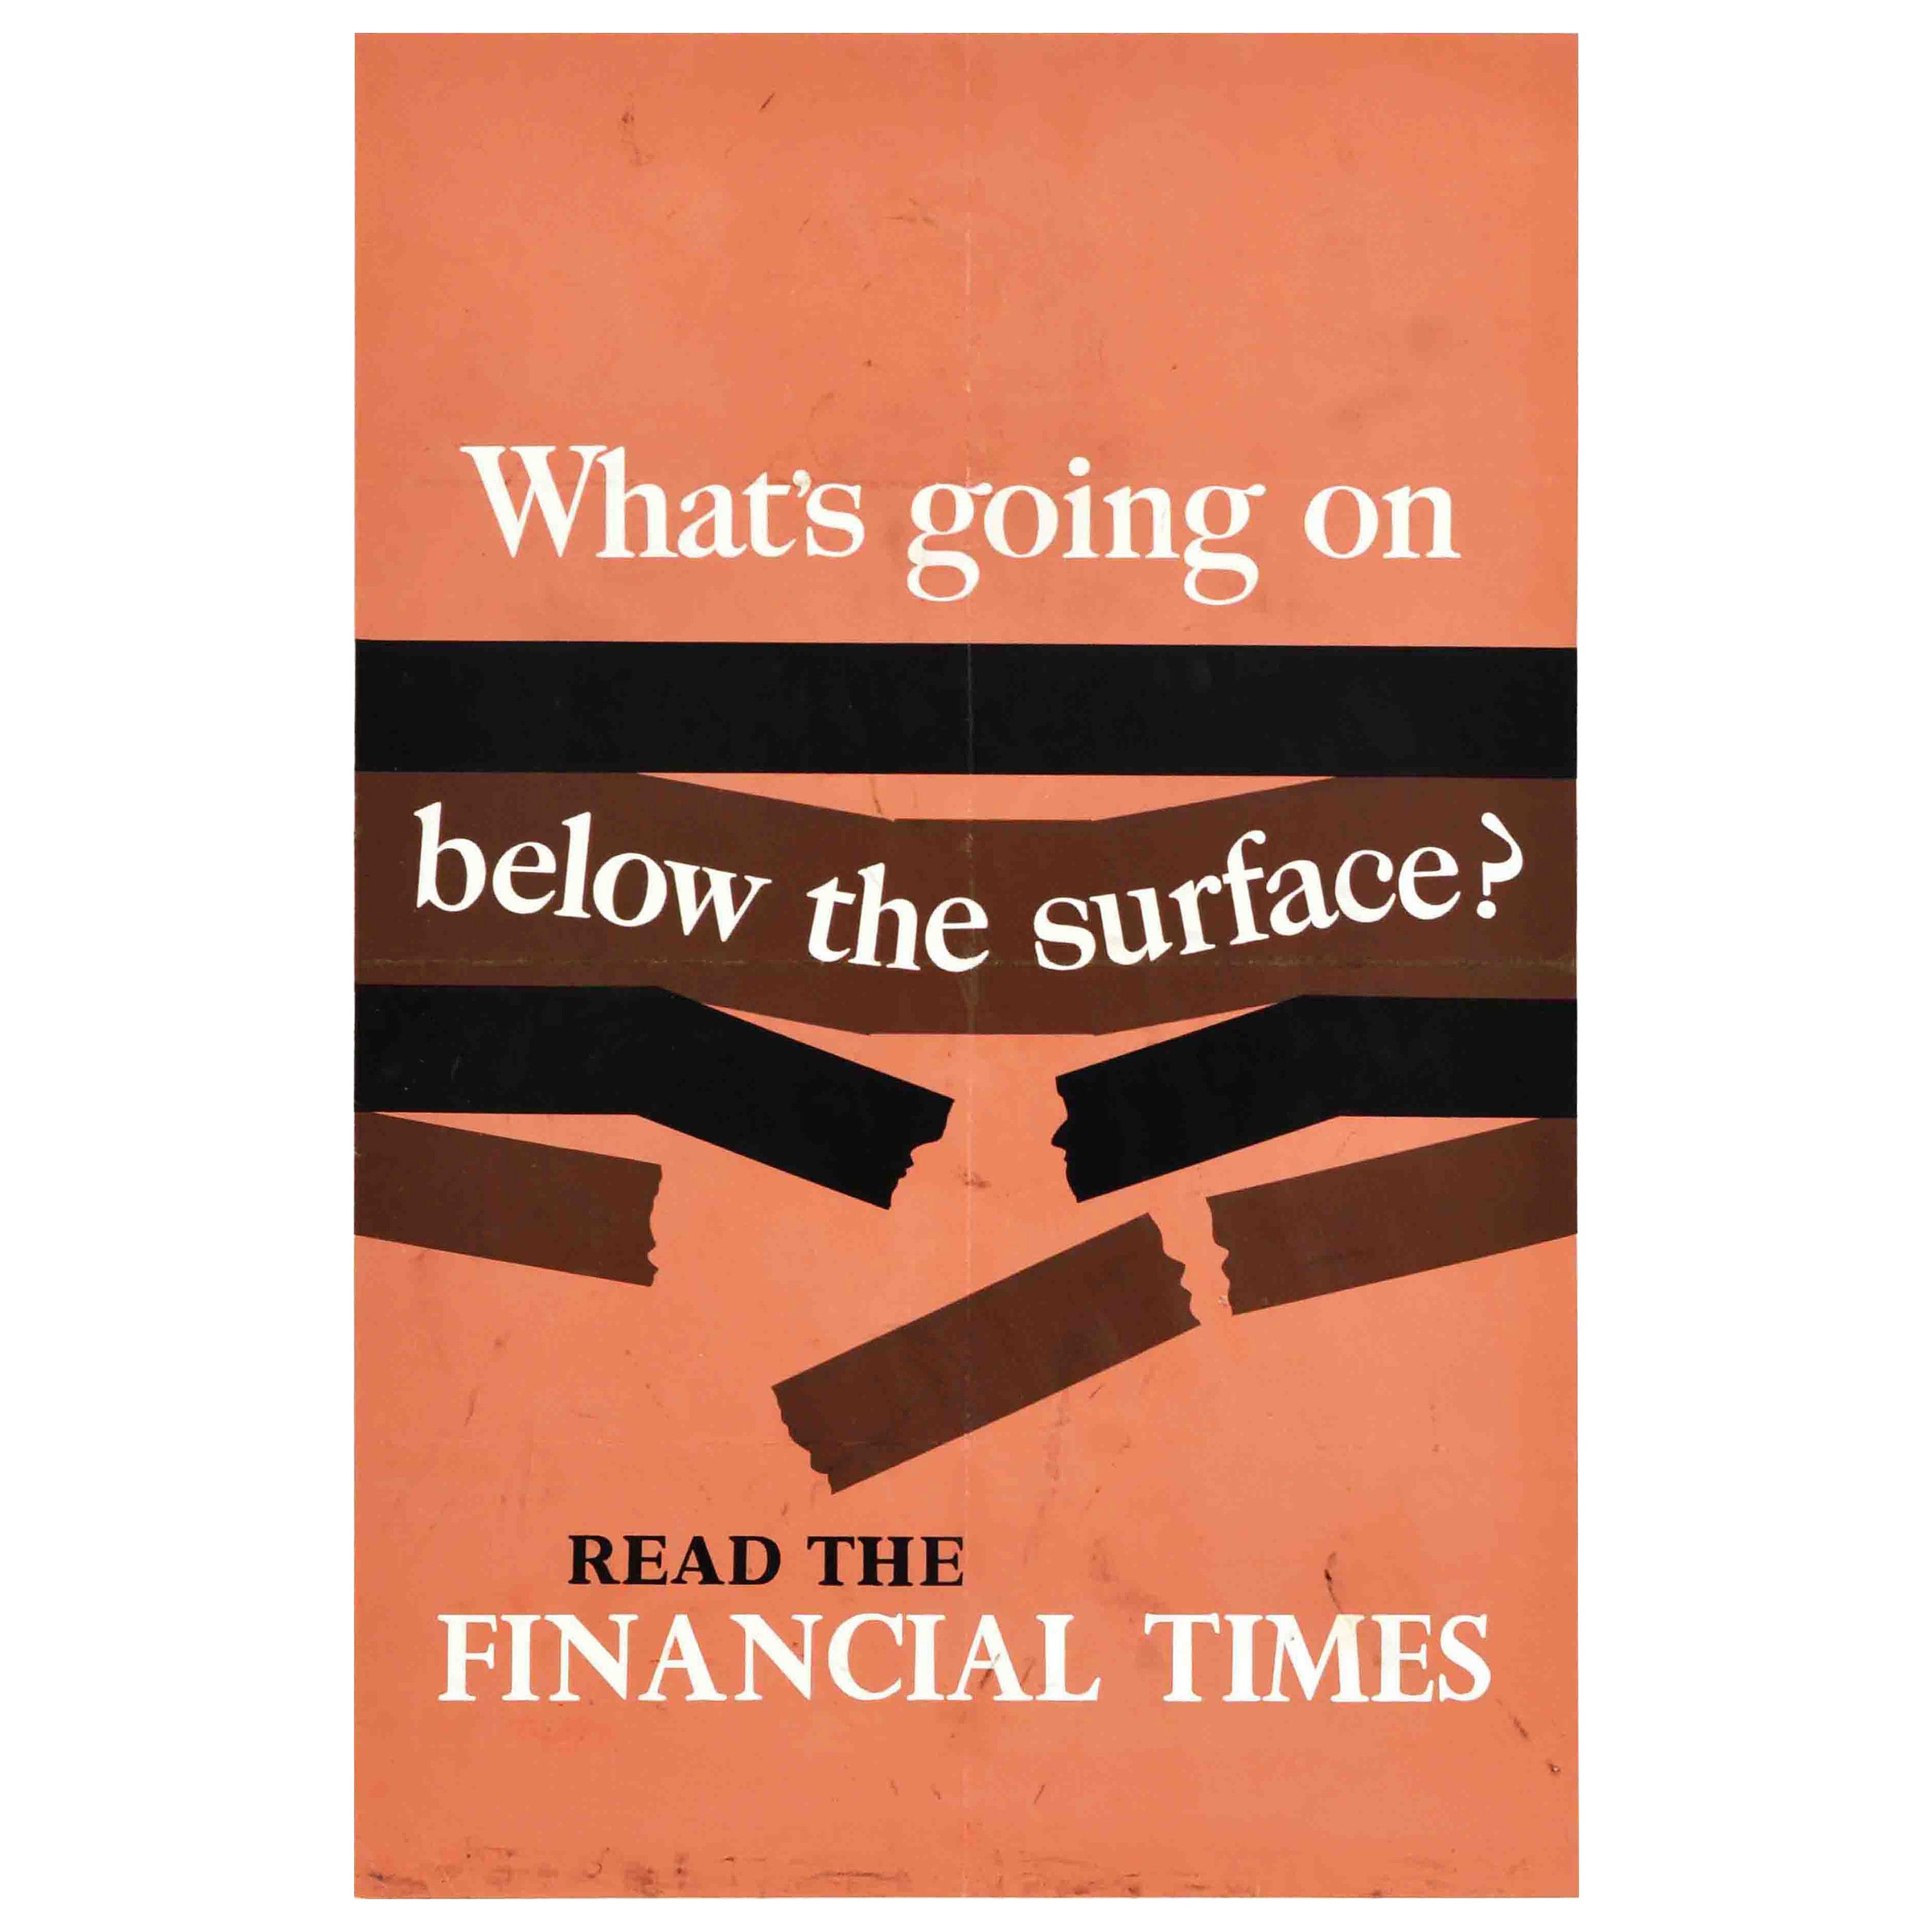 Original Vintage Advertising Poster Financial Times Below The Surface Newspaper For Sale